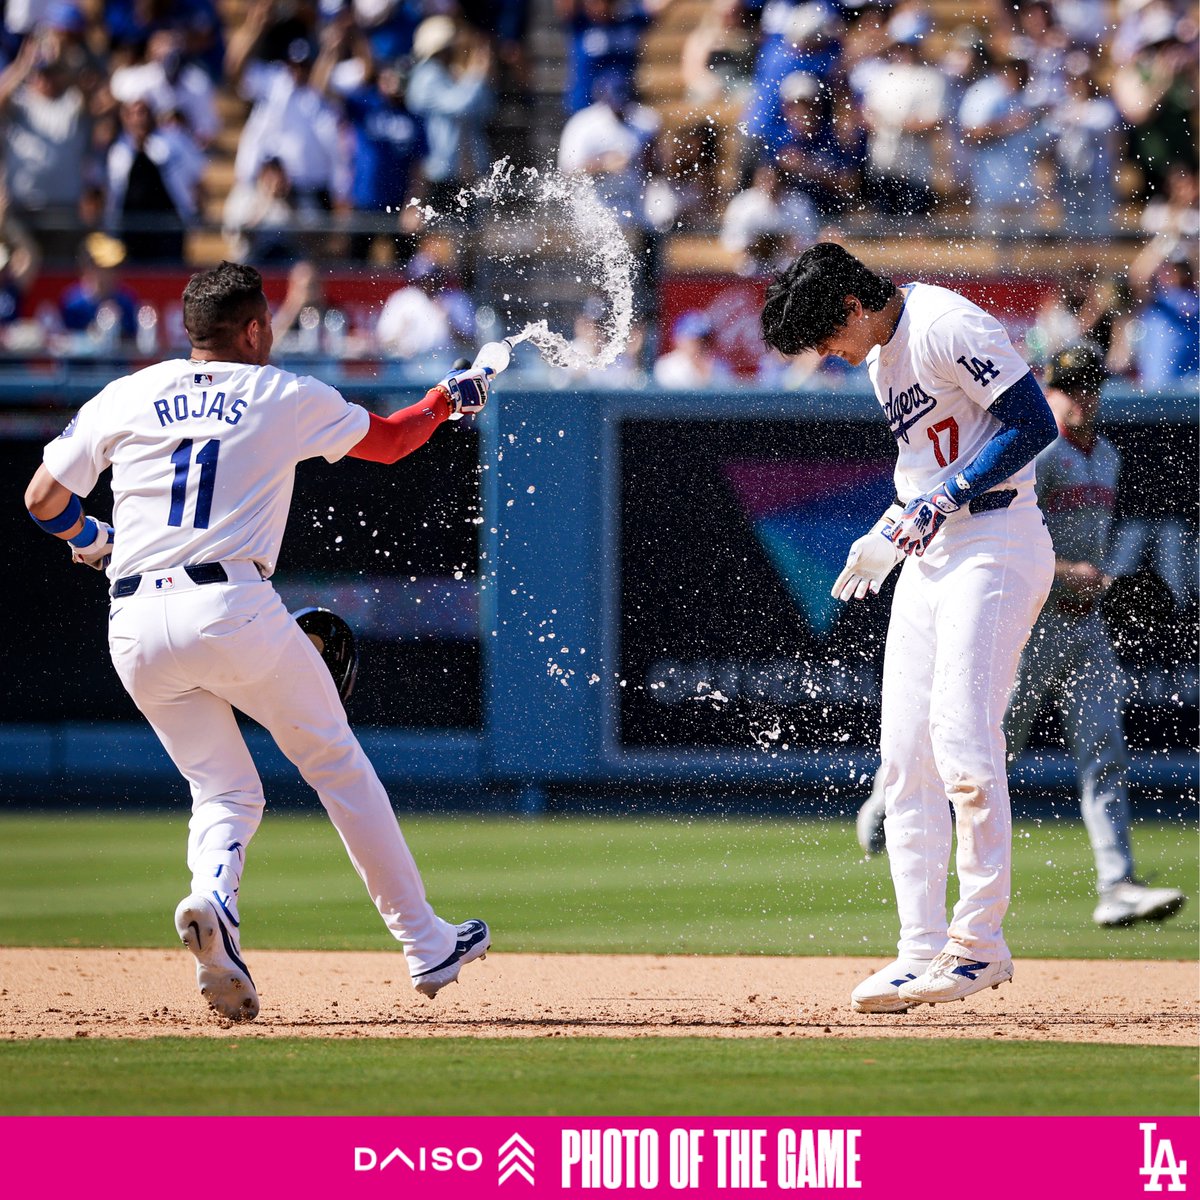 Today’s Photo of the Game presented by Daiso.